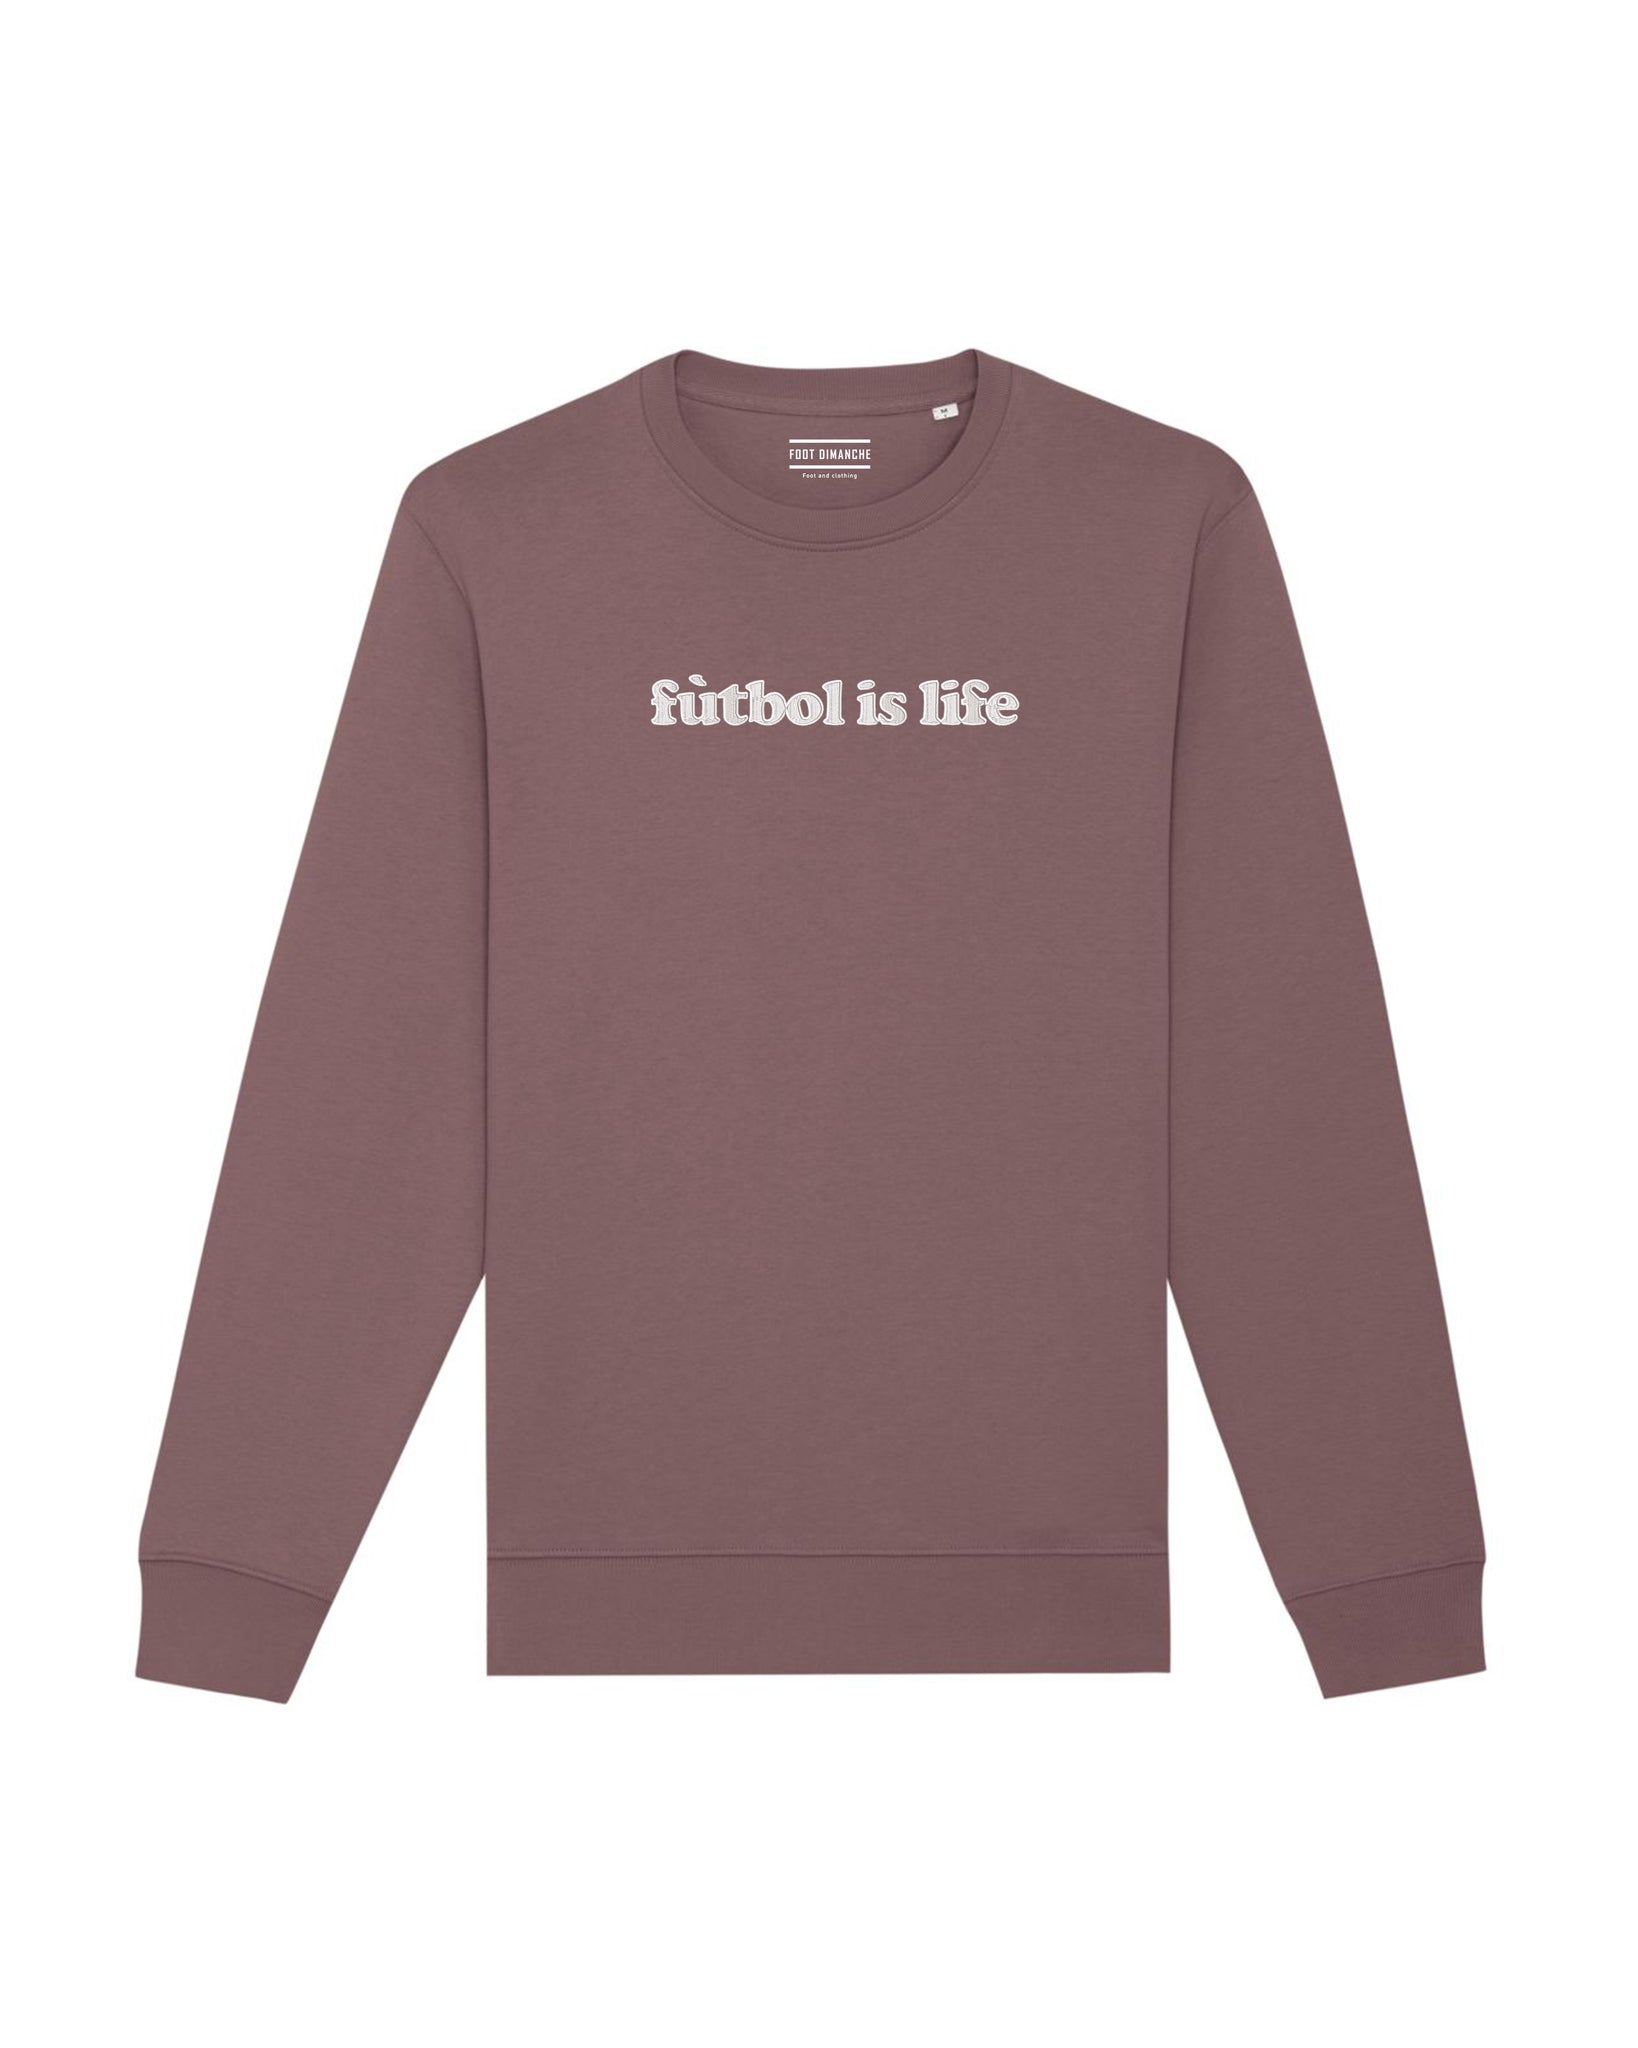 Sweat fútbol is life Ted Lasso - Foot Dimanche